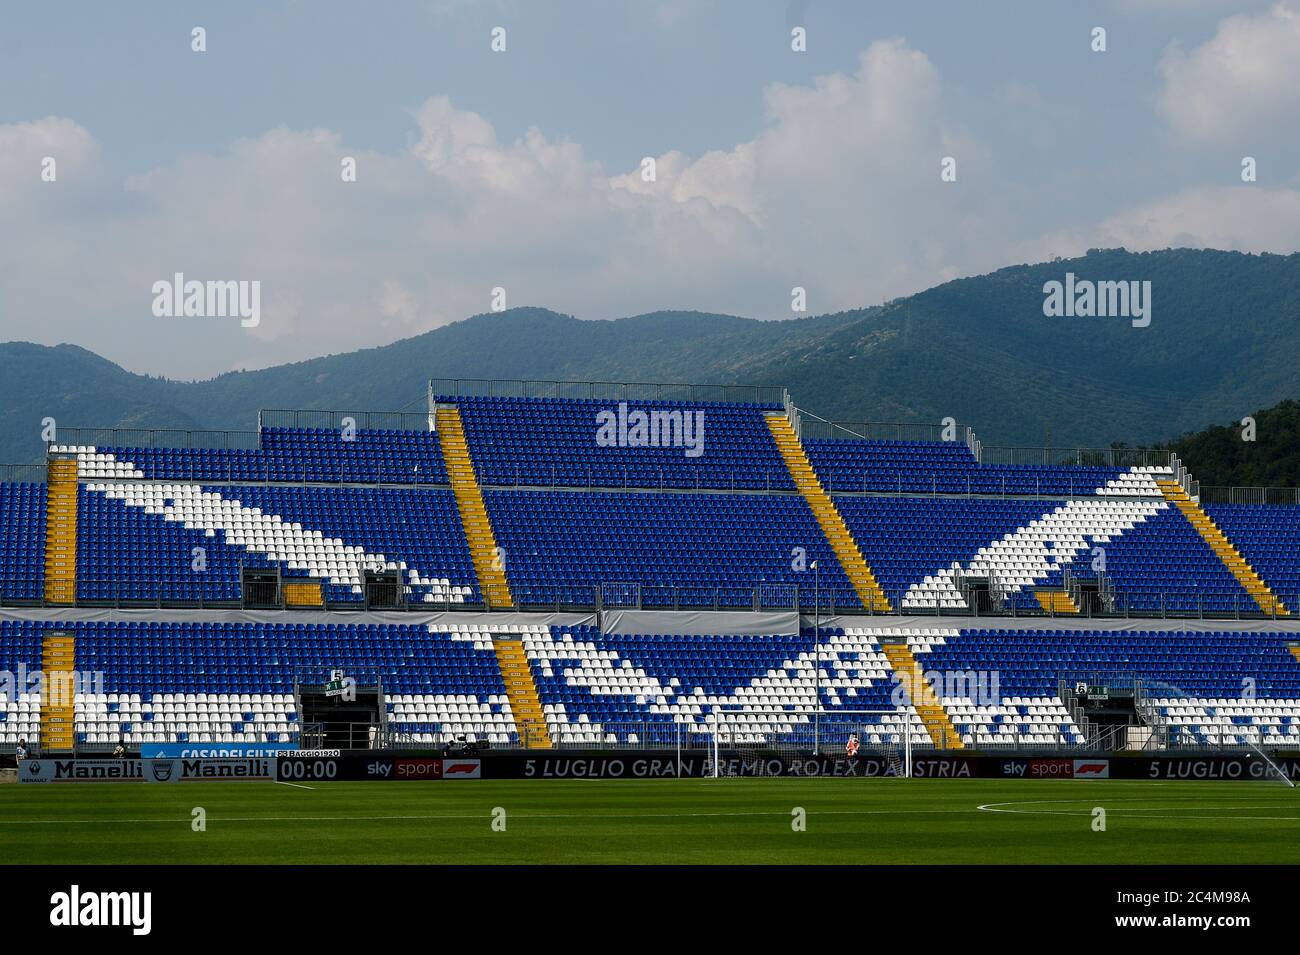 Brescia, Italy - 27 June, 2020: General view of empty stadio Mario Rigamonti prior to the Serie A football match between Brescia Calcio and Genoa CFC. The match ended in a 2-2 tie. Credit: Nicolò Campo/Alamy Live News Stock Photo